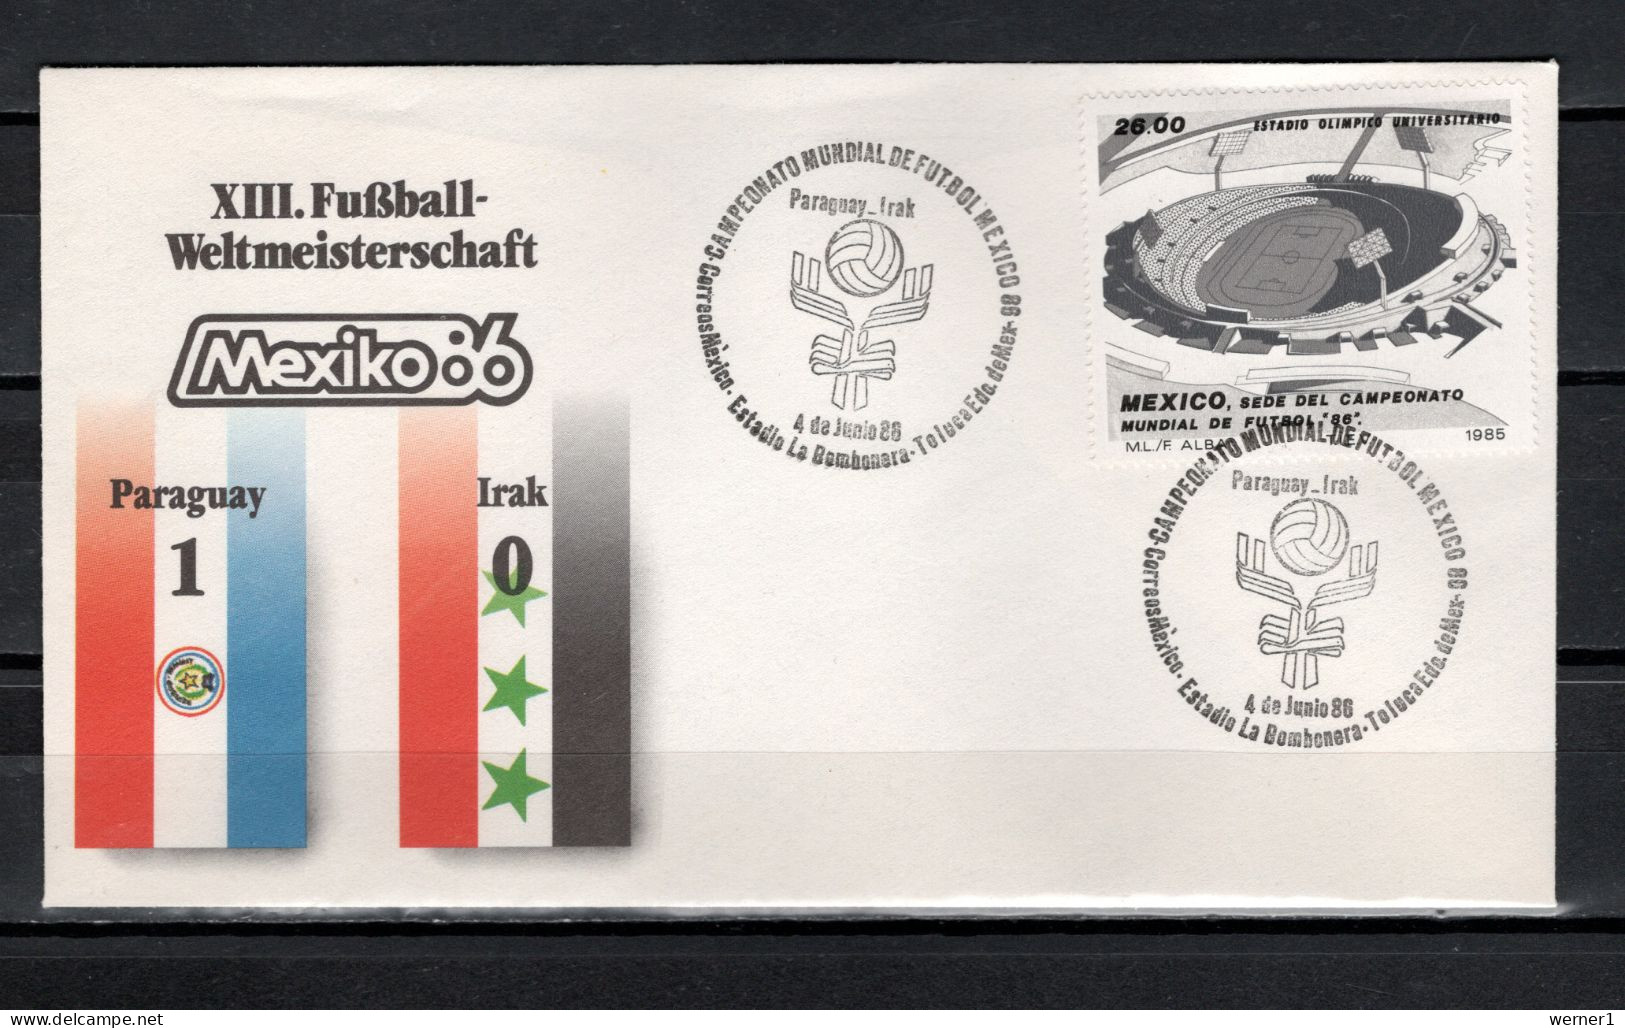 Mexico 1986 Football Soccer World Cup Commemorative Cover Match Paraguay - Iraq 1 : 0 - 1986 – México